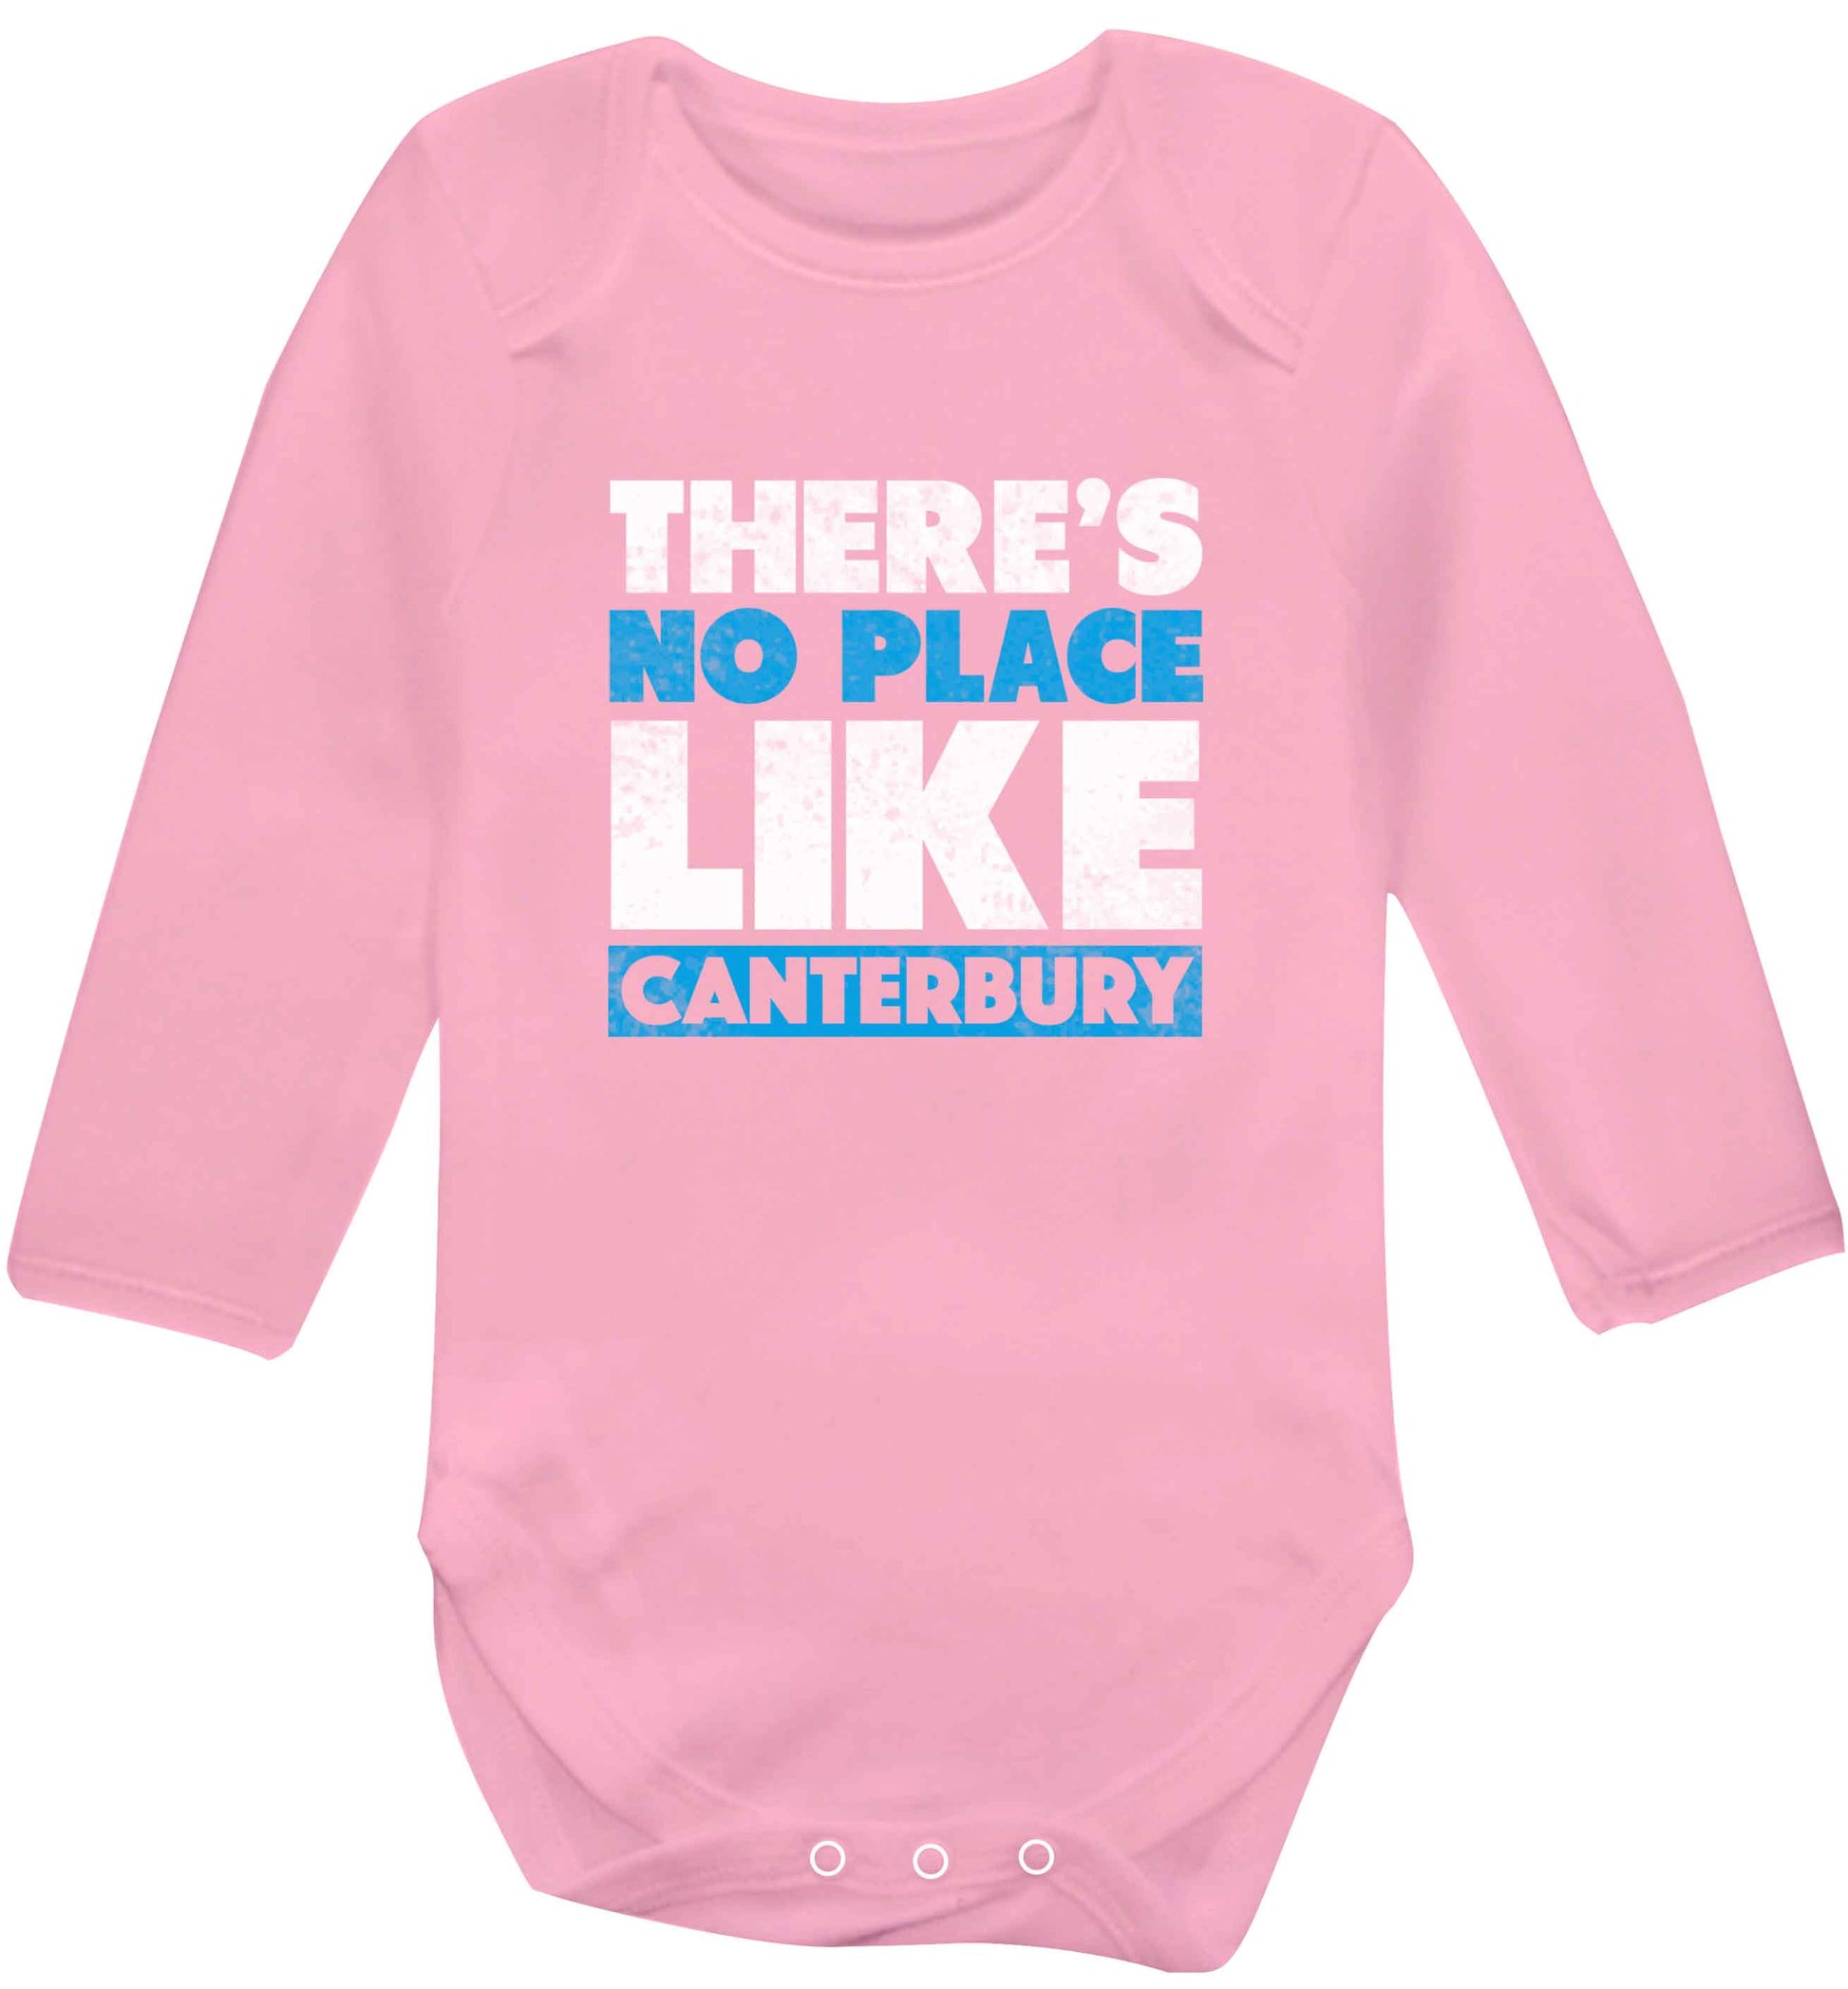 There's no place like Canterbury baby vest long sleeved pale pink 6-12 months